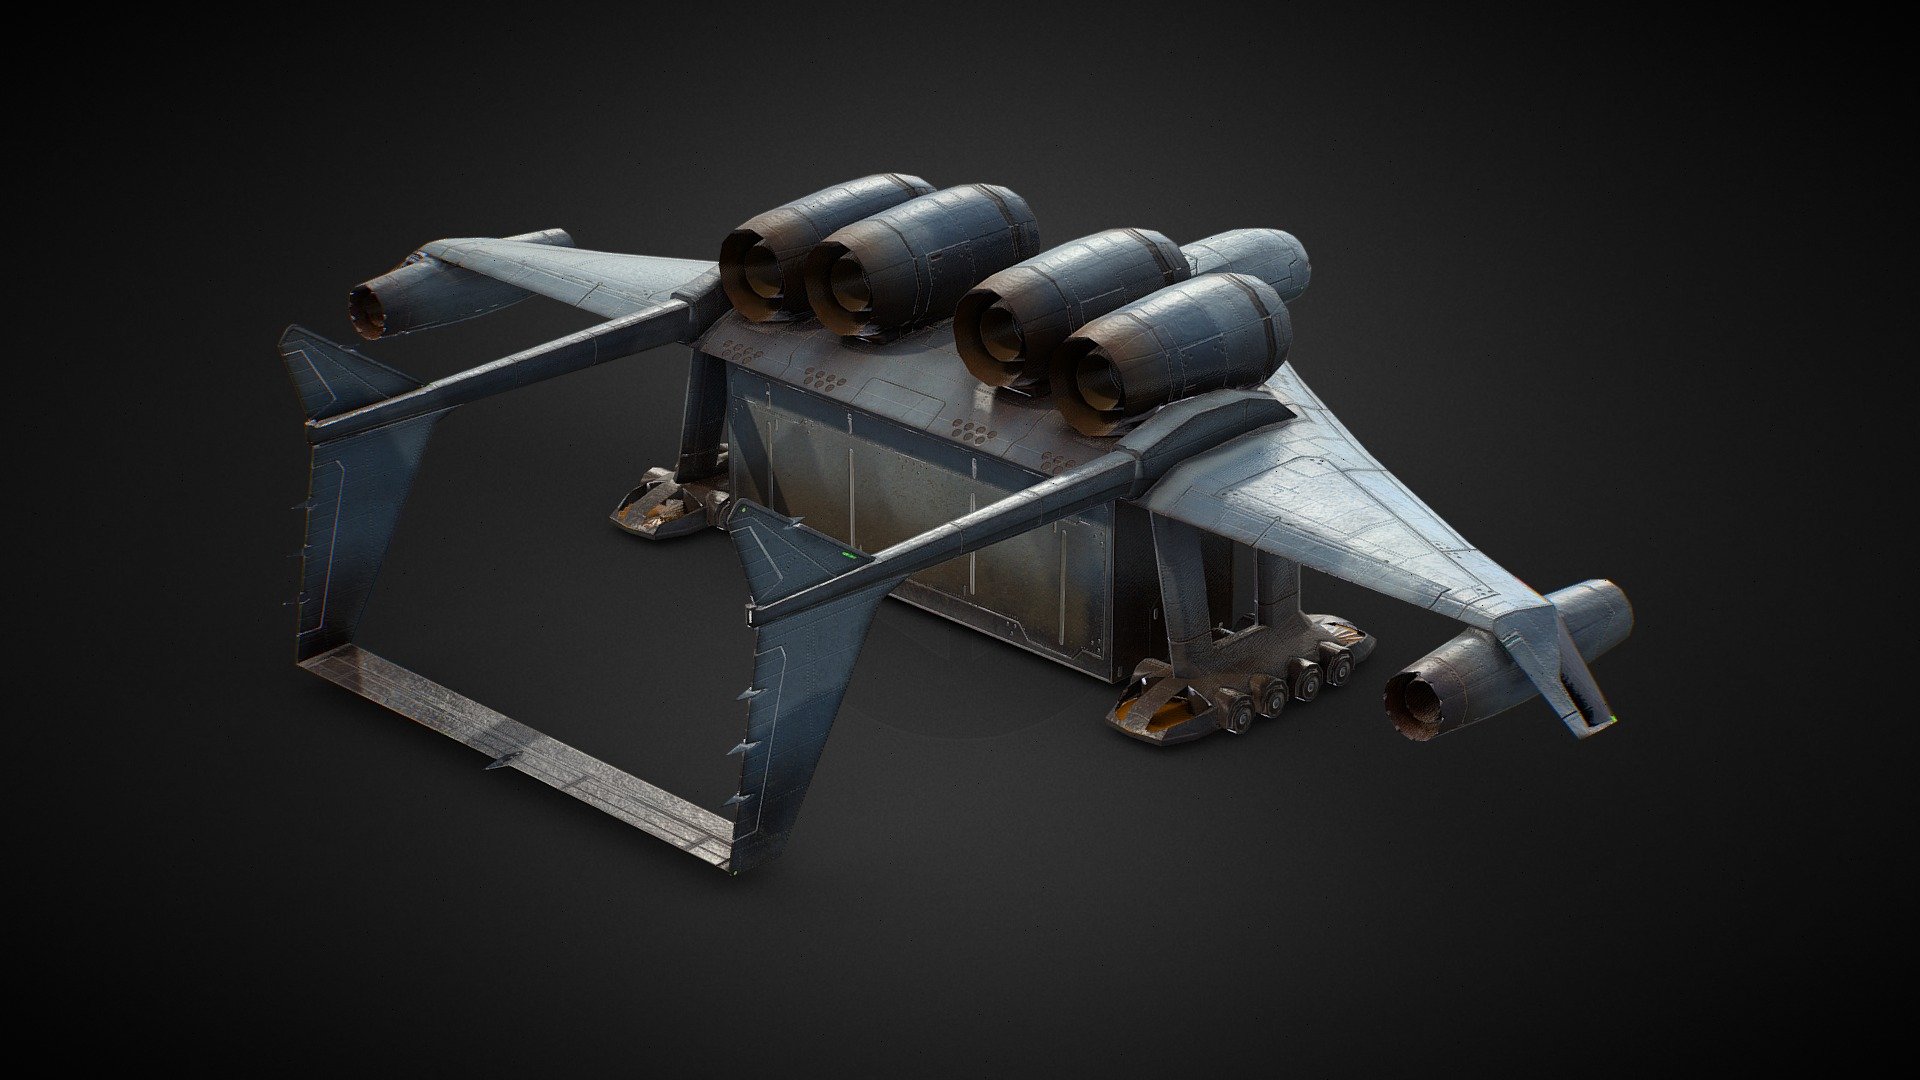 Medea Transport Plane Naval Colour From 0080
This model was made for One Year War mod of Hearts of Iron IV. Our Mod Steam Home Page https://steamcommunity.com/sharedfiles/filedetails/?id=2064985570 - Medea Transport Plane Naval Colour - 3D model by One Year War Mod (@hoi4oneyearwar) 3d model